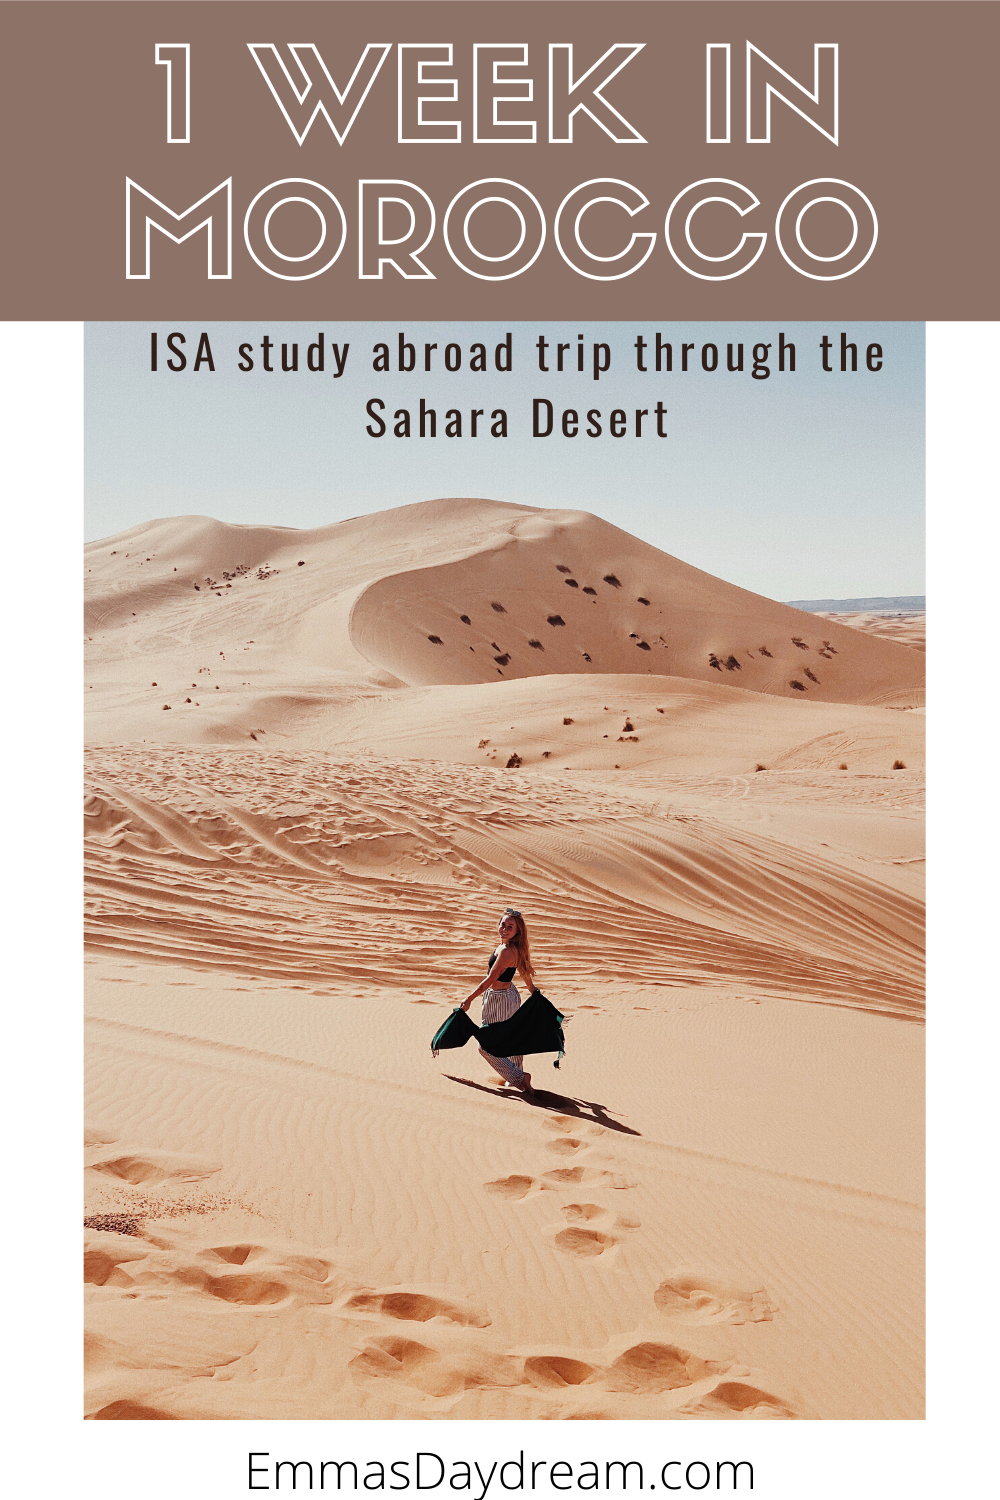 How to spend a week in Morocco, camping in the Sahara Desert. Travel itinerary for Fez, Meknes, and the Sahara Desert. Study abroad weekend trips. ISA Study Abroad Spain Morocco trip review 